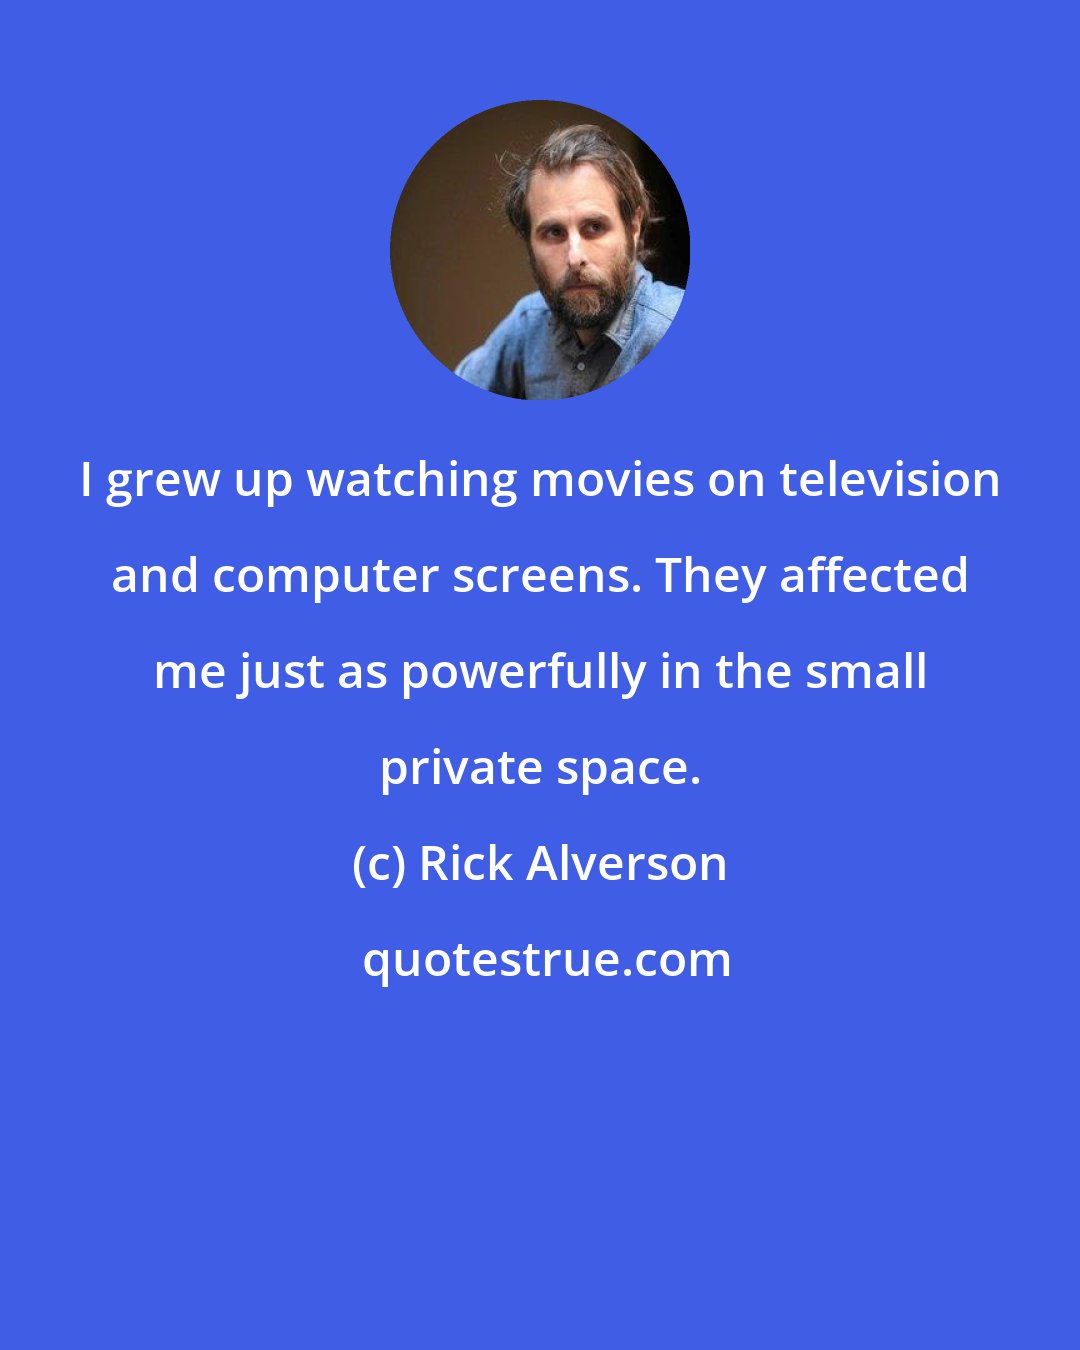 Rick Alverson: I grew up watching movies on television and computer screens. They affected me just as powerfully in the small private space.